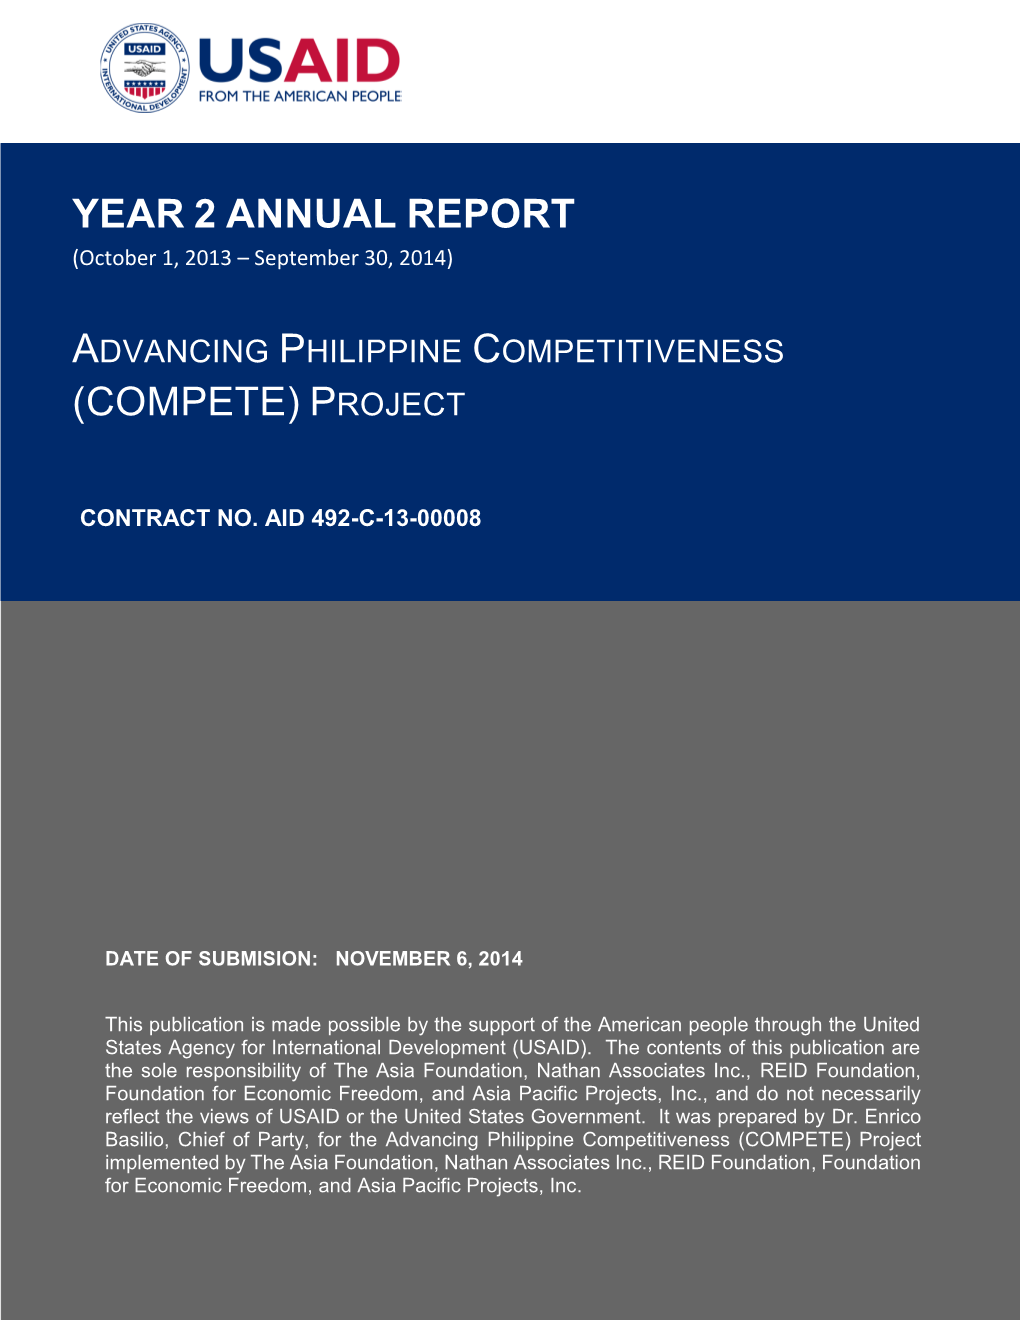 Year 2 Annual Report (Compete)